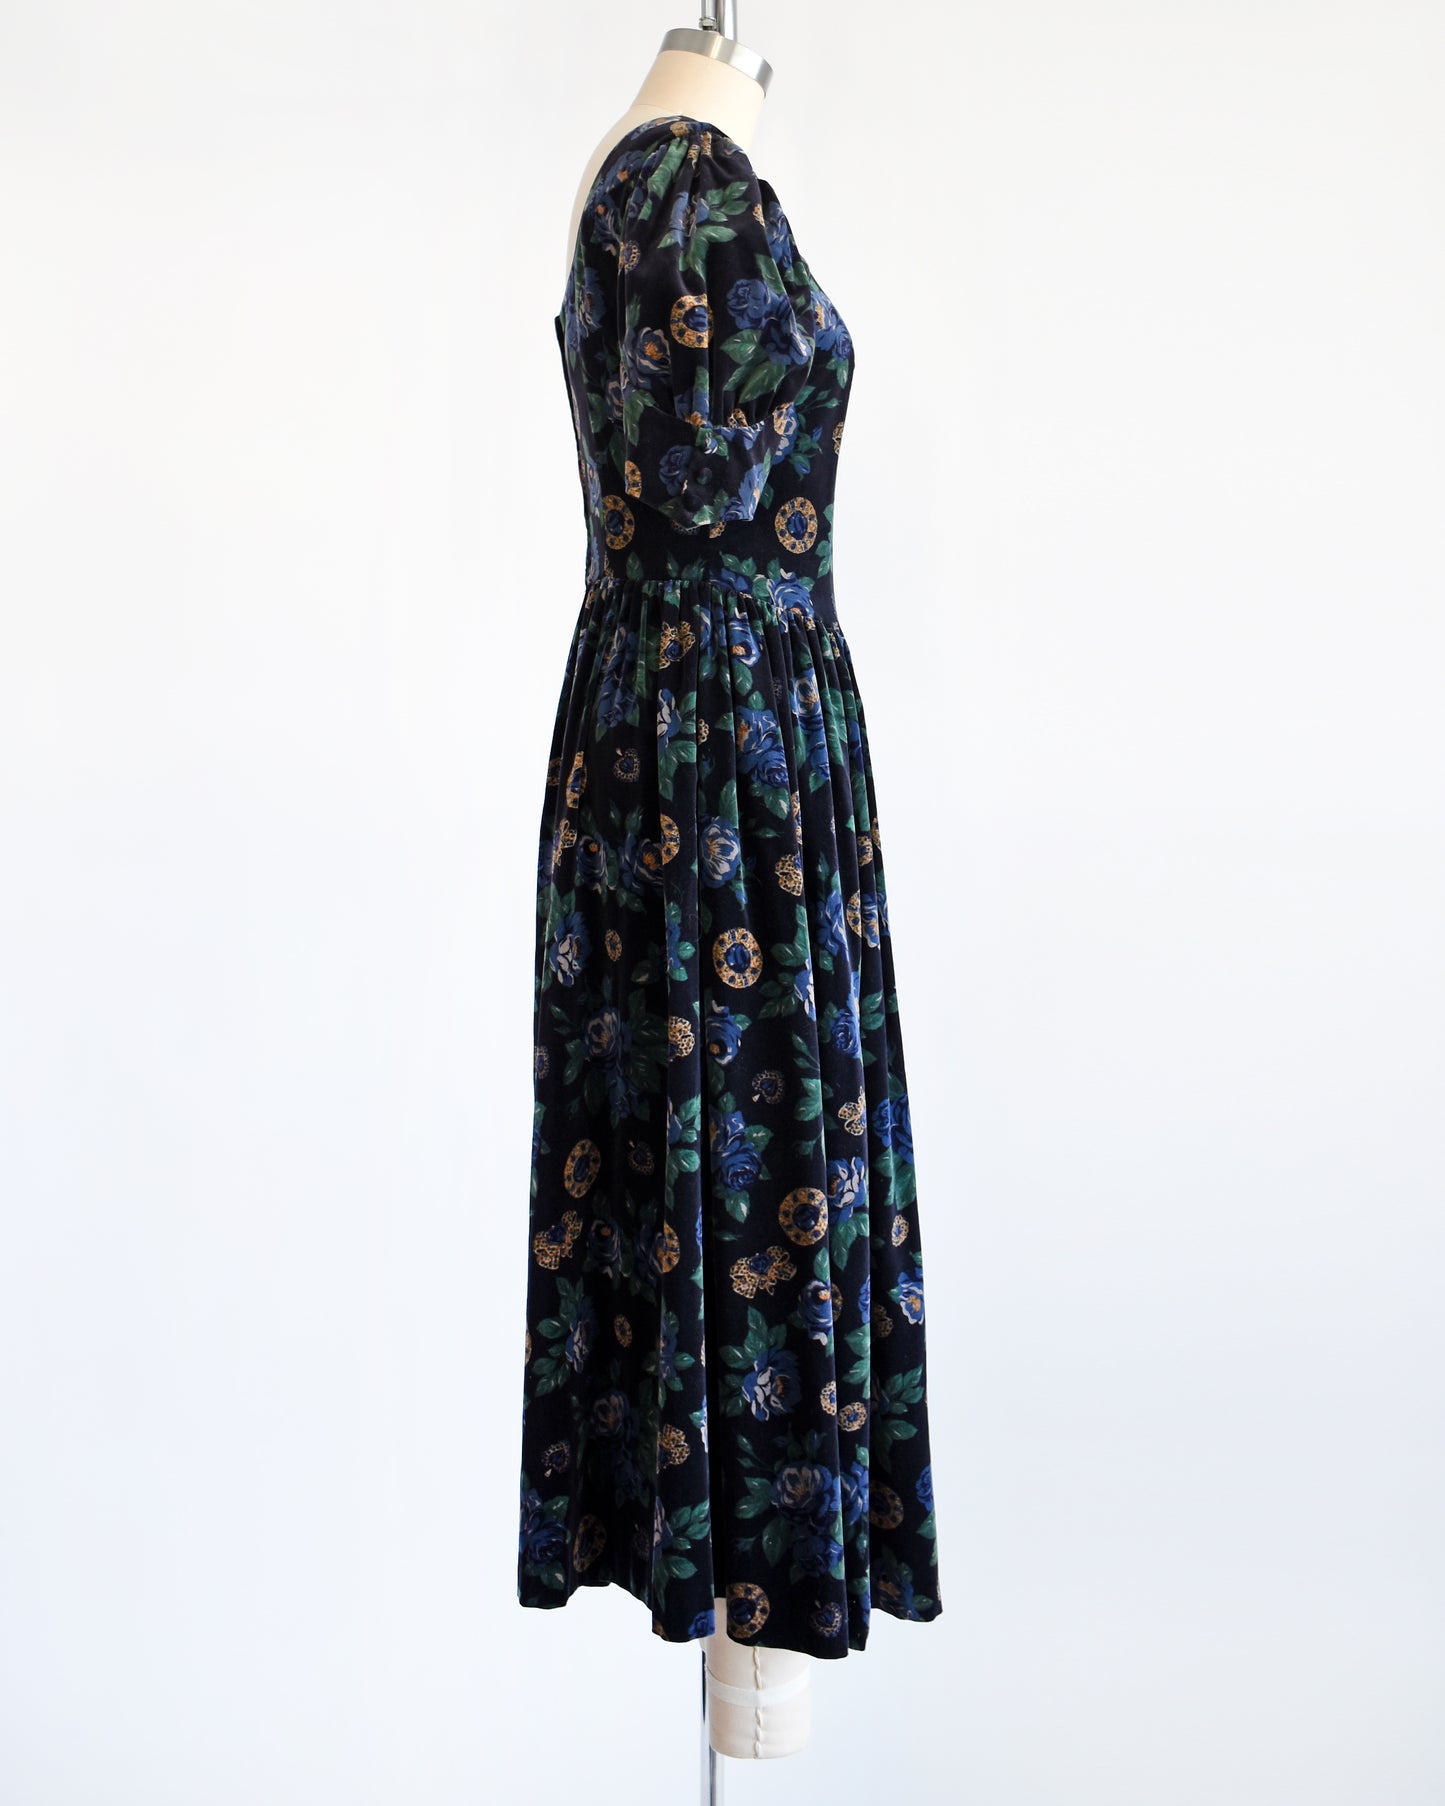 Side view of a vintage 1980s Laura Ashley dress. Black cotton velvet with a navy blue floral and metal gold jewels print.